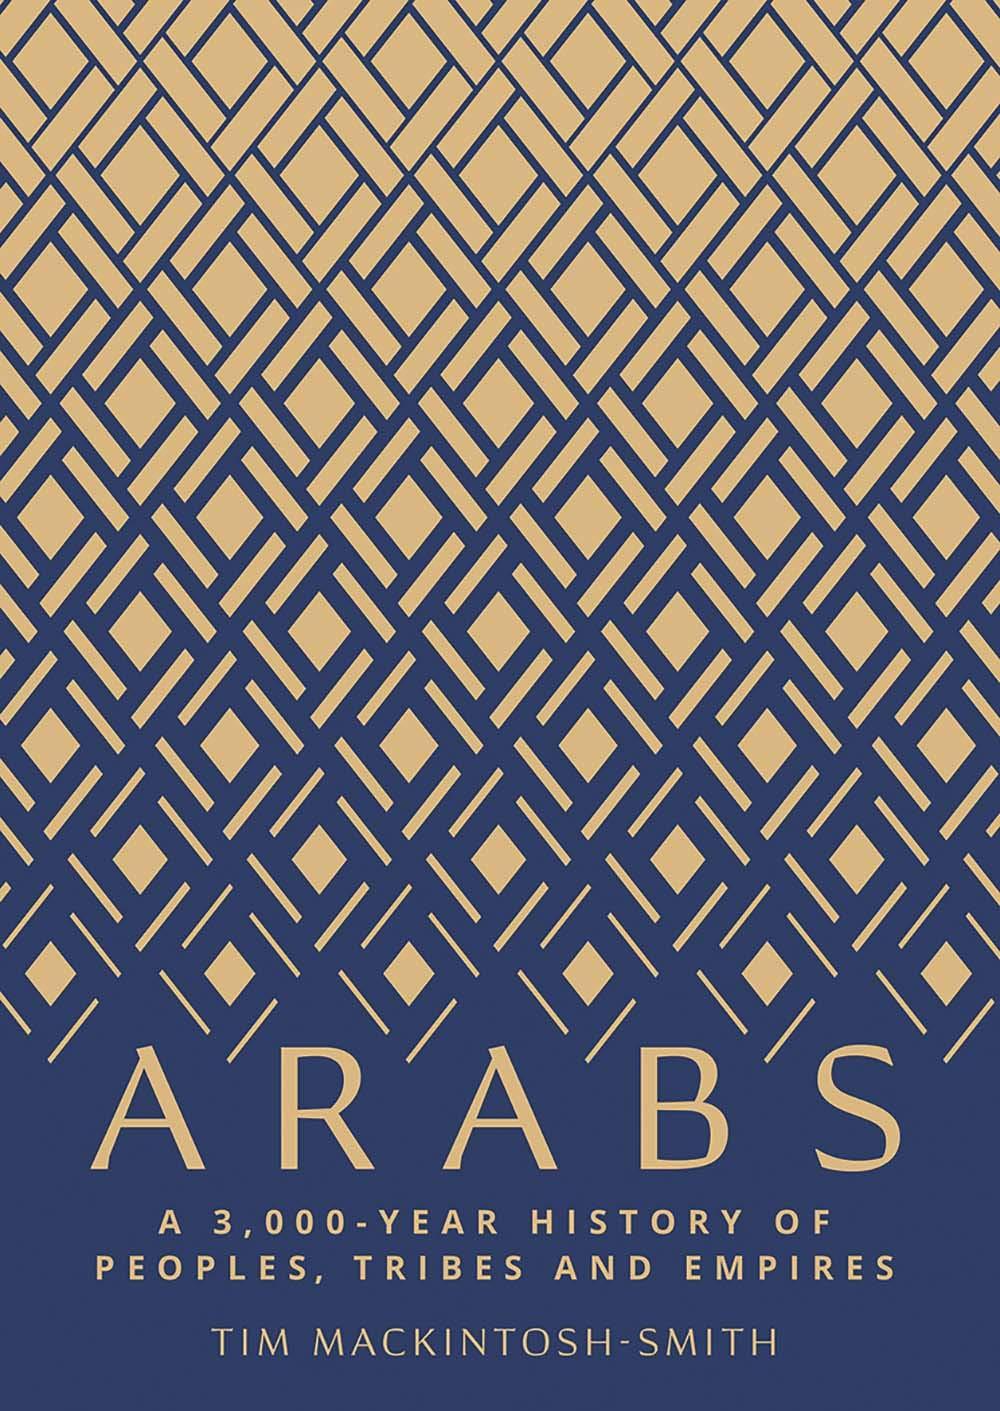 ARABS: A 3,000 YEAR HISTORY OF PEOPLES, TRIBES AND